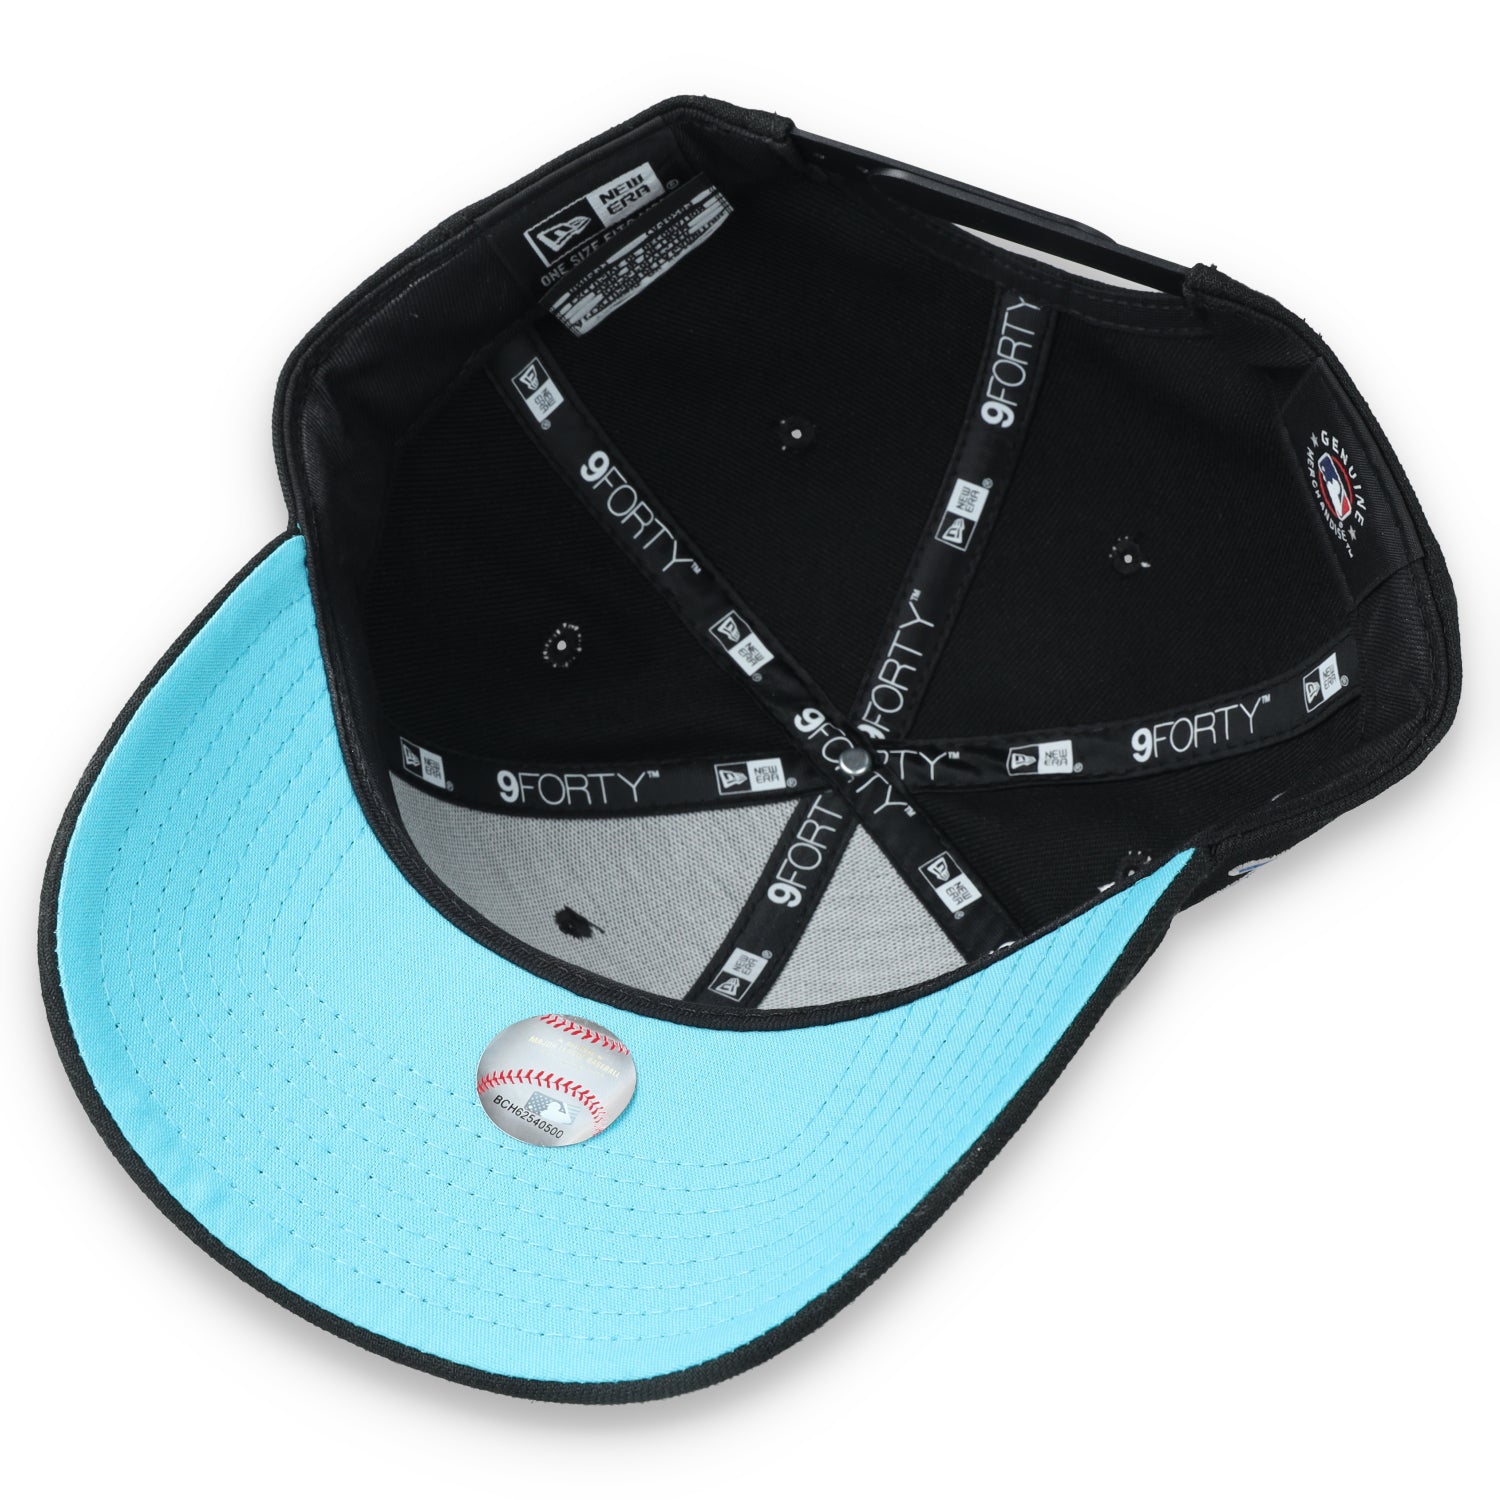 New Era Chicago White Sox Father's Day 9FORTY Adjustable Hat